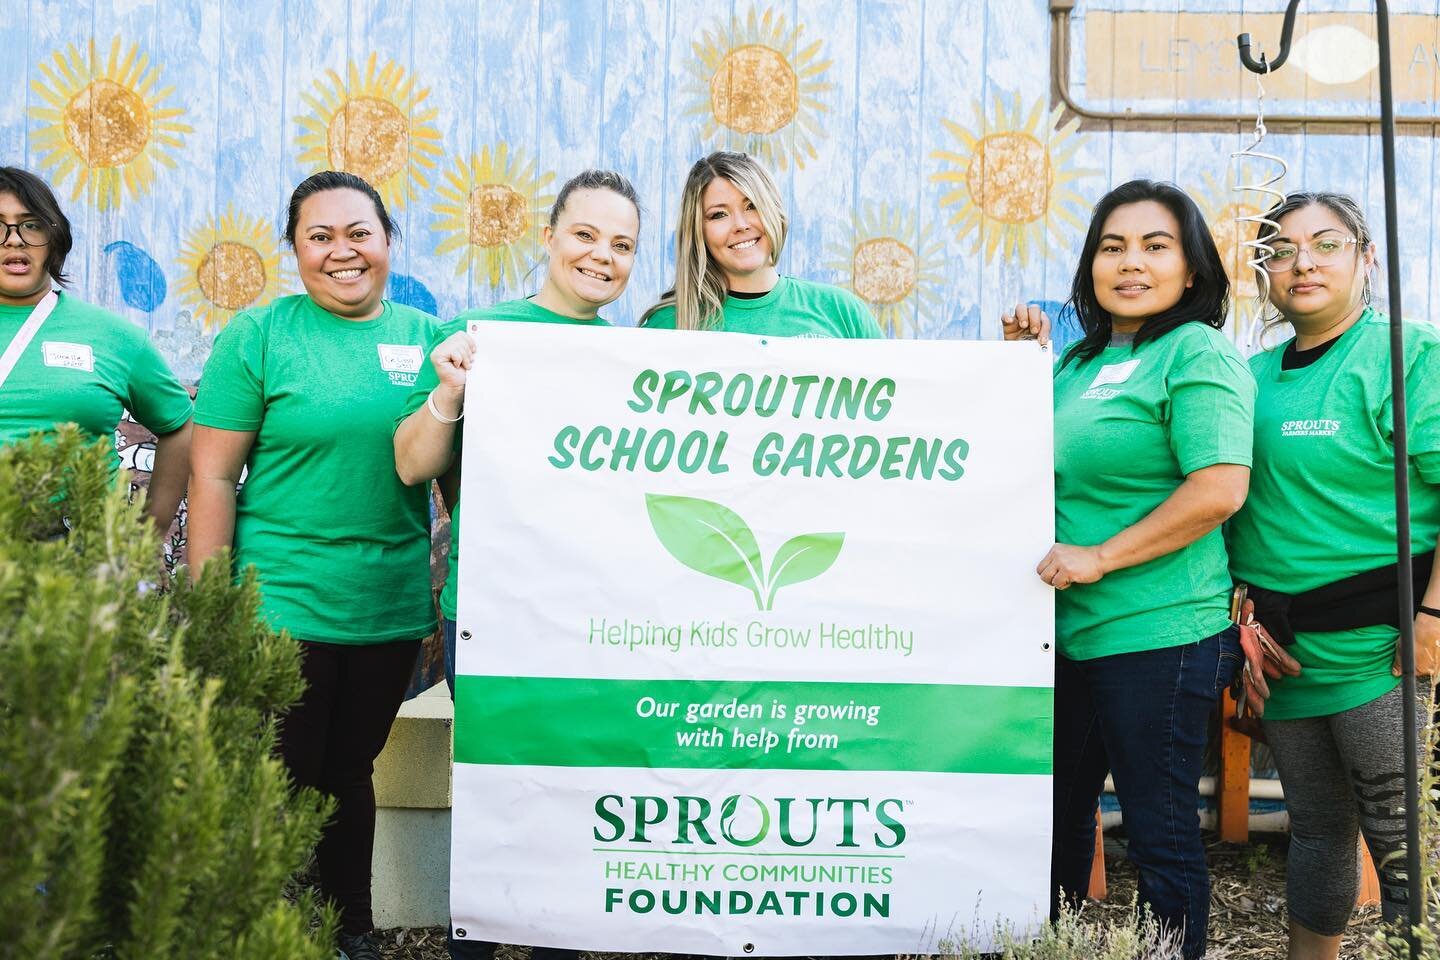 HUGE thank you to Sprouts and their day of service! With their team of volunteers and a few familiar faces, we were able to tear down the rotting marquee, tear out the rotting compost bins and rebuild, build a new home for the watering cans, fix up l